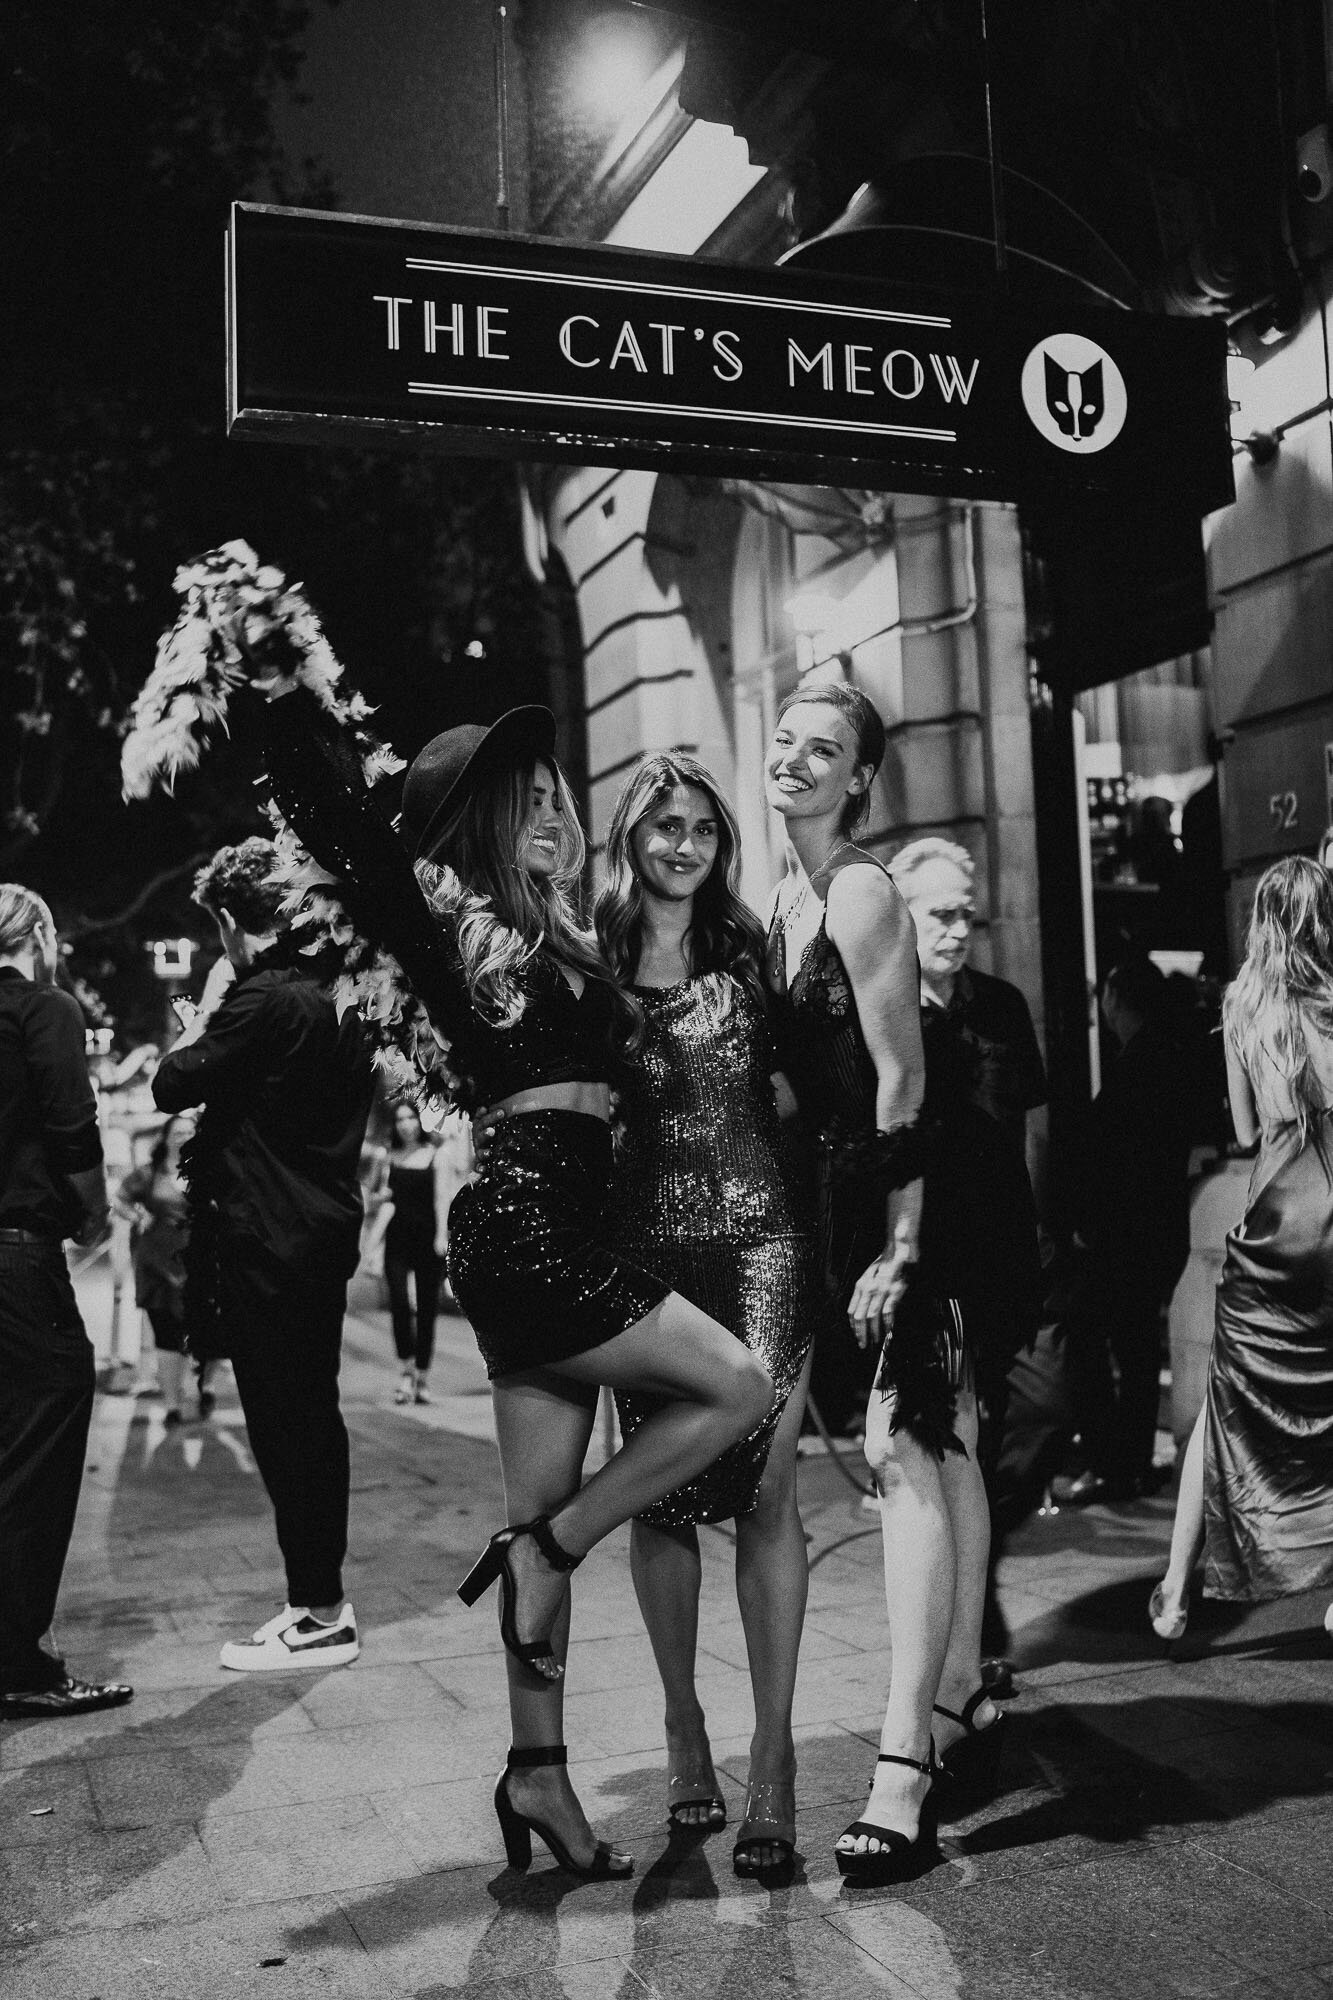 Photo of some people posing outside The Cat's Meow for a corporate event